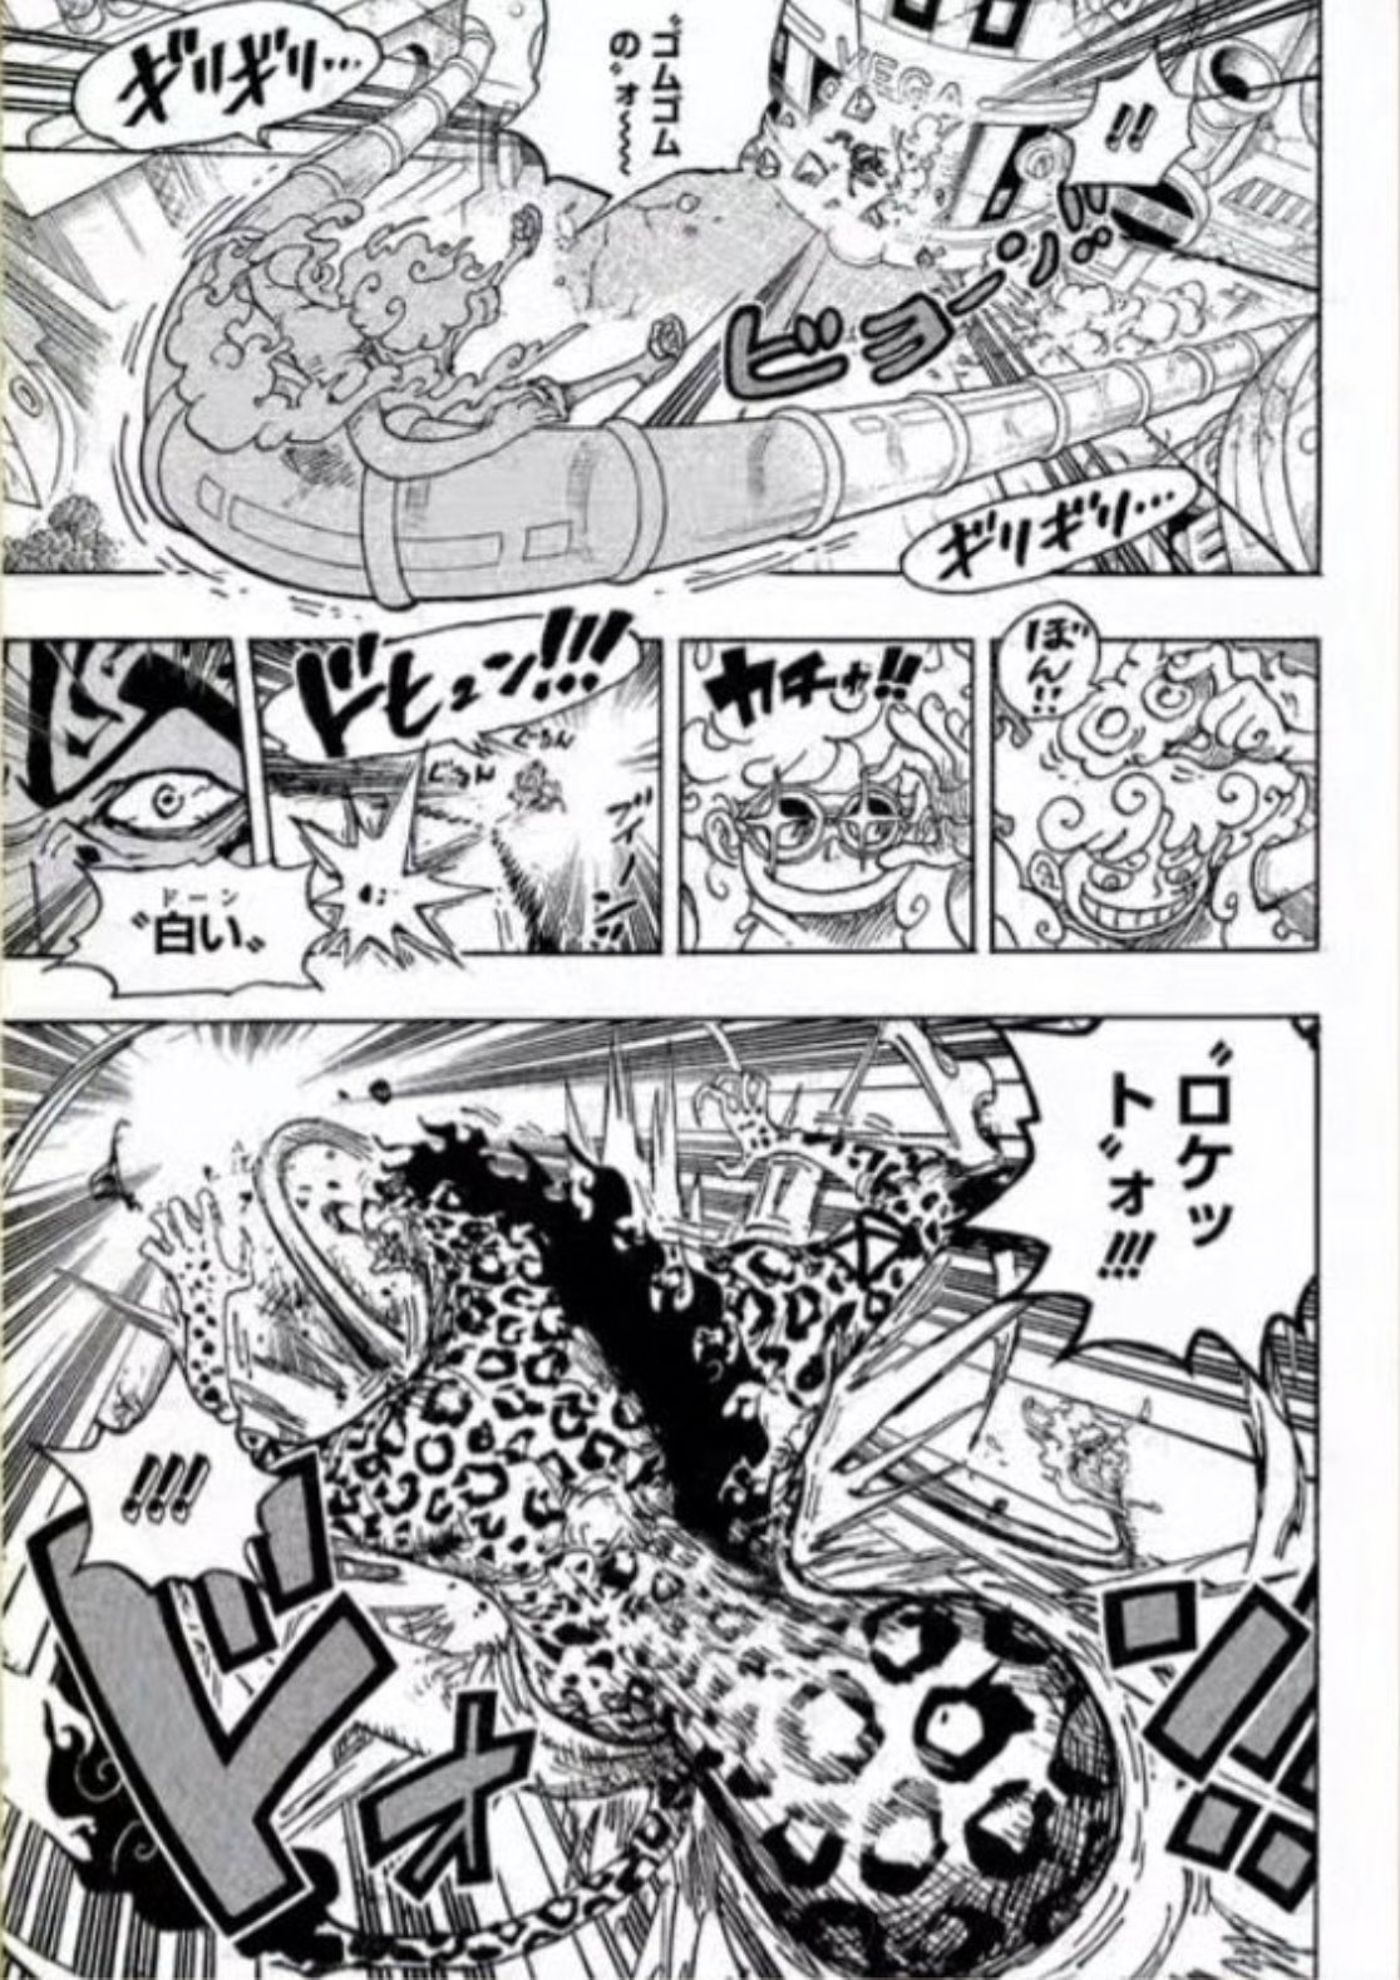 A sneak peek at chapter 1070 of One Piece with Luffy punching Lucci with Gomu Gomu no White Rocket.